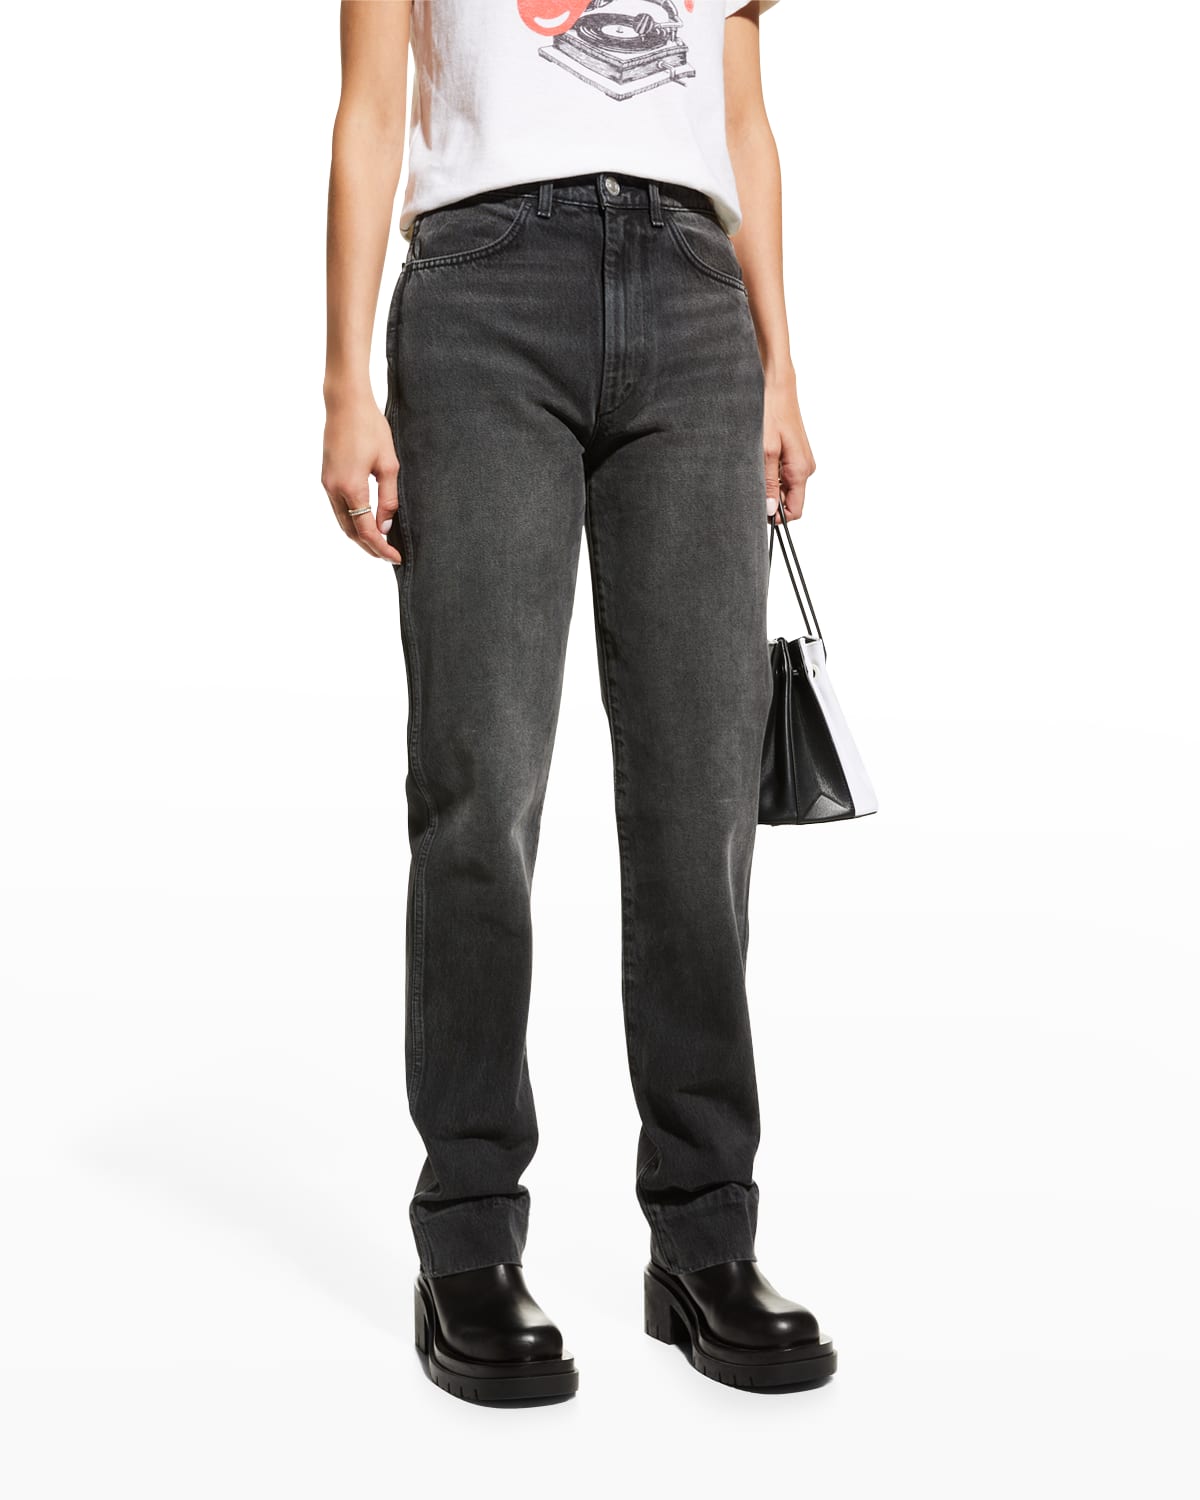 Re Sp 47 Sp Done High Sp 45 Sp Rise Jeans | Neiman Marcus